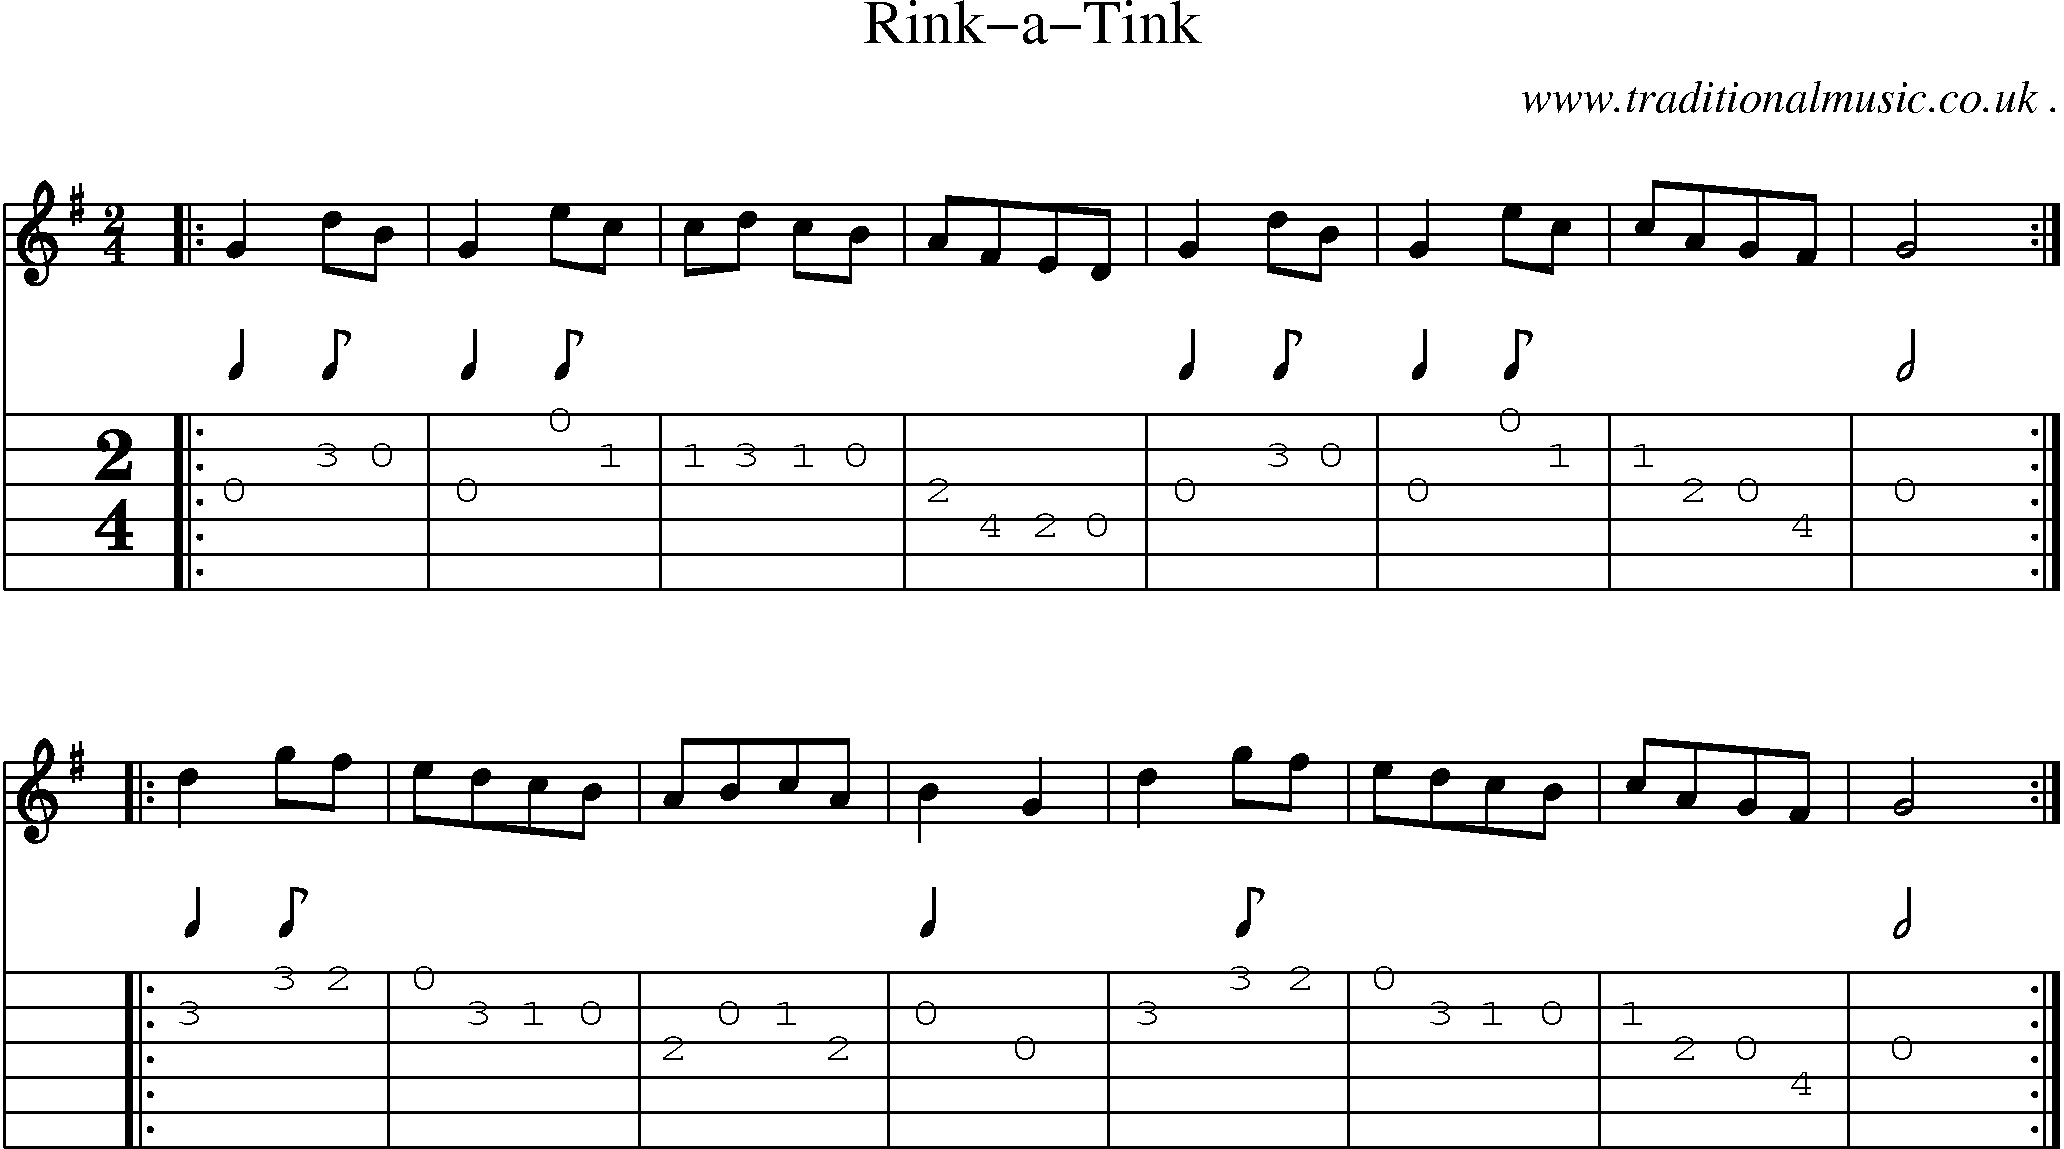 Sheet-Music and Guitar Tabs for Rink-a-tink